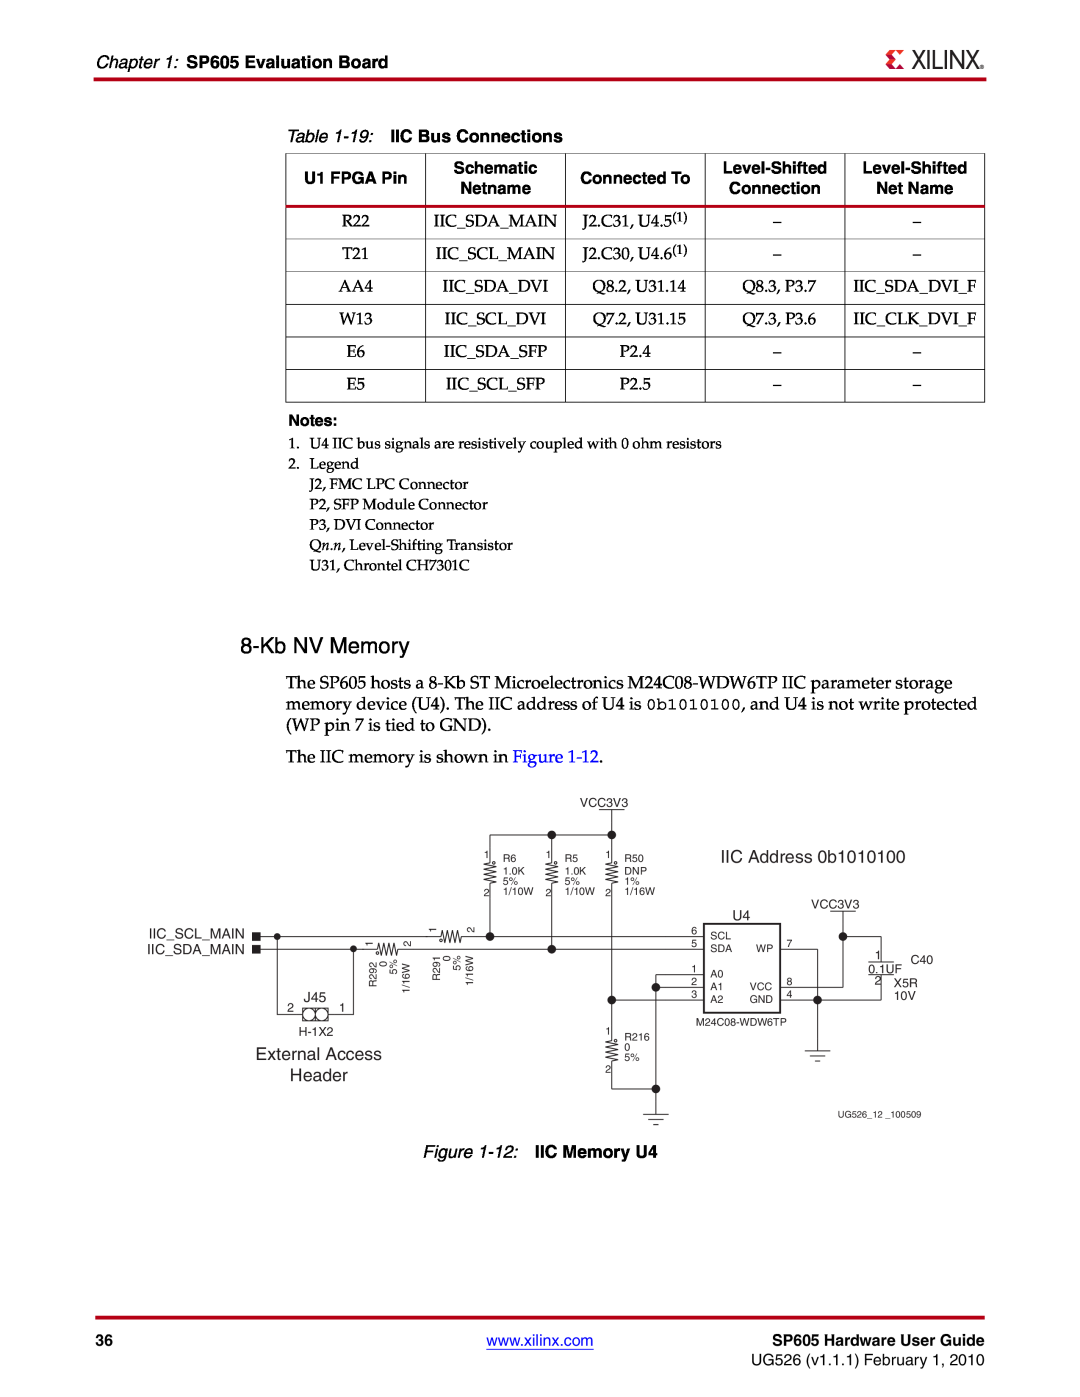 Xilinx SP605 Kb NV Memory, 19 IIC Bus Connections, Schematic, Connected To, Level-Shifted, IIC Address 0b1010100, Header 